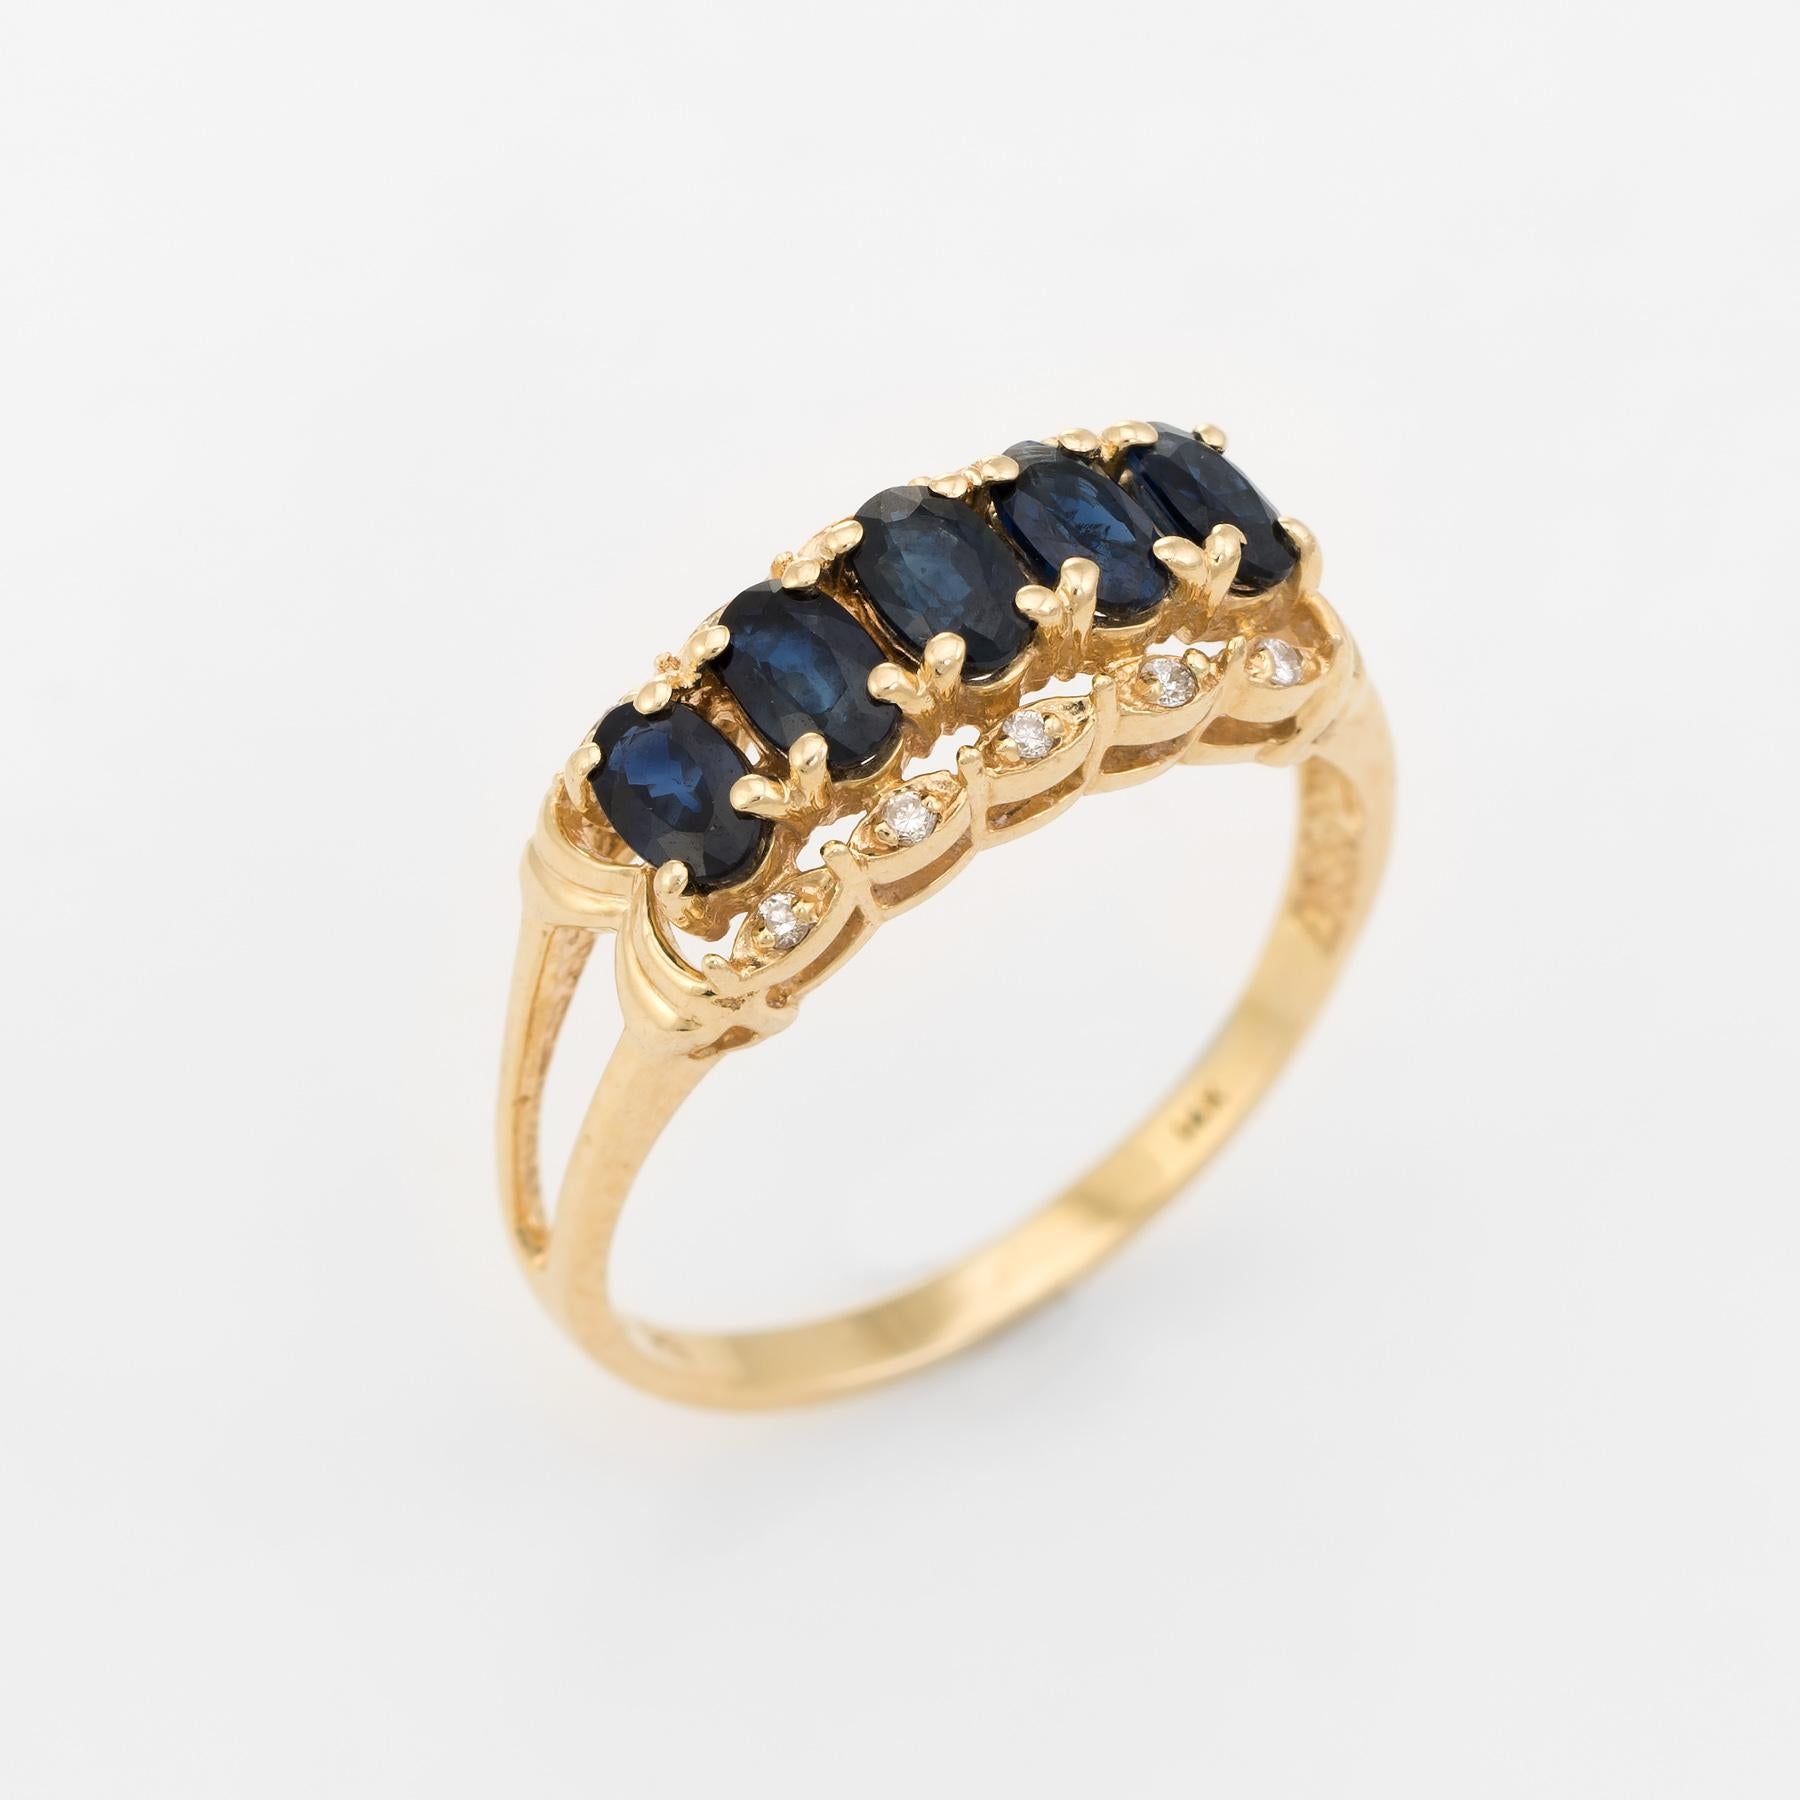 Finely detailed vintage anniversary band, crafted in 14 karat yellow gold. 

Faceted oval cut blue sapphires are uniform in size measuring 5mm x 3mm (estimated at 0.30 carats each - 1.50 carats total estimated weight). Ten round brilliant cut